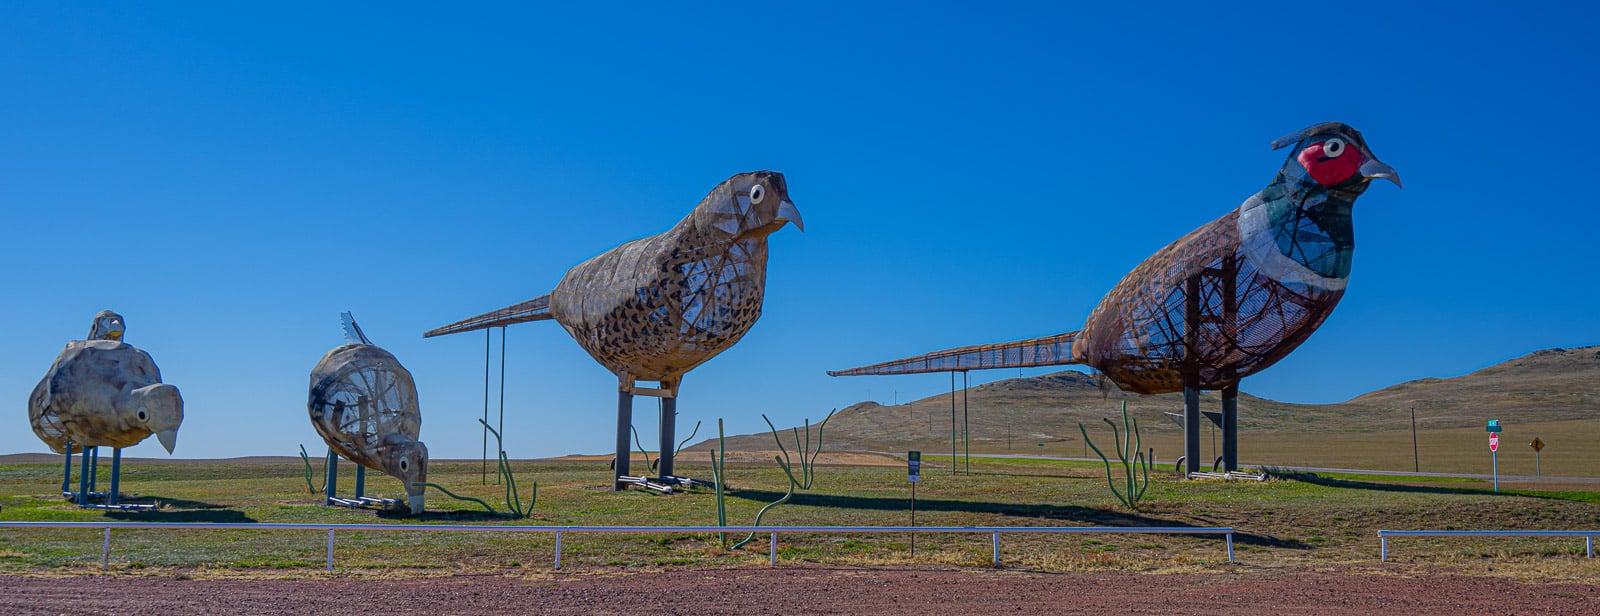 This family of pheasants by sculptor Gary Greff is located along the Enchated Highway running from I-94 to Regent, North Dakota.